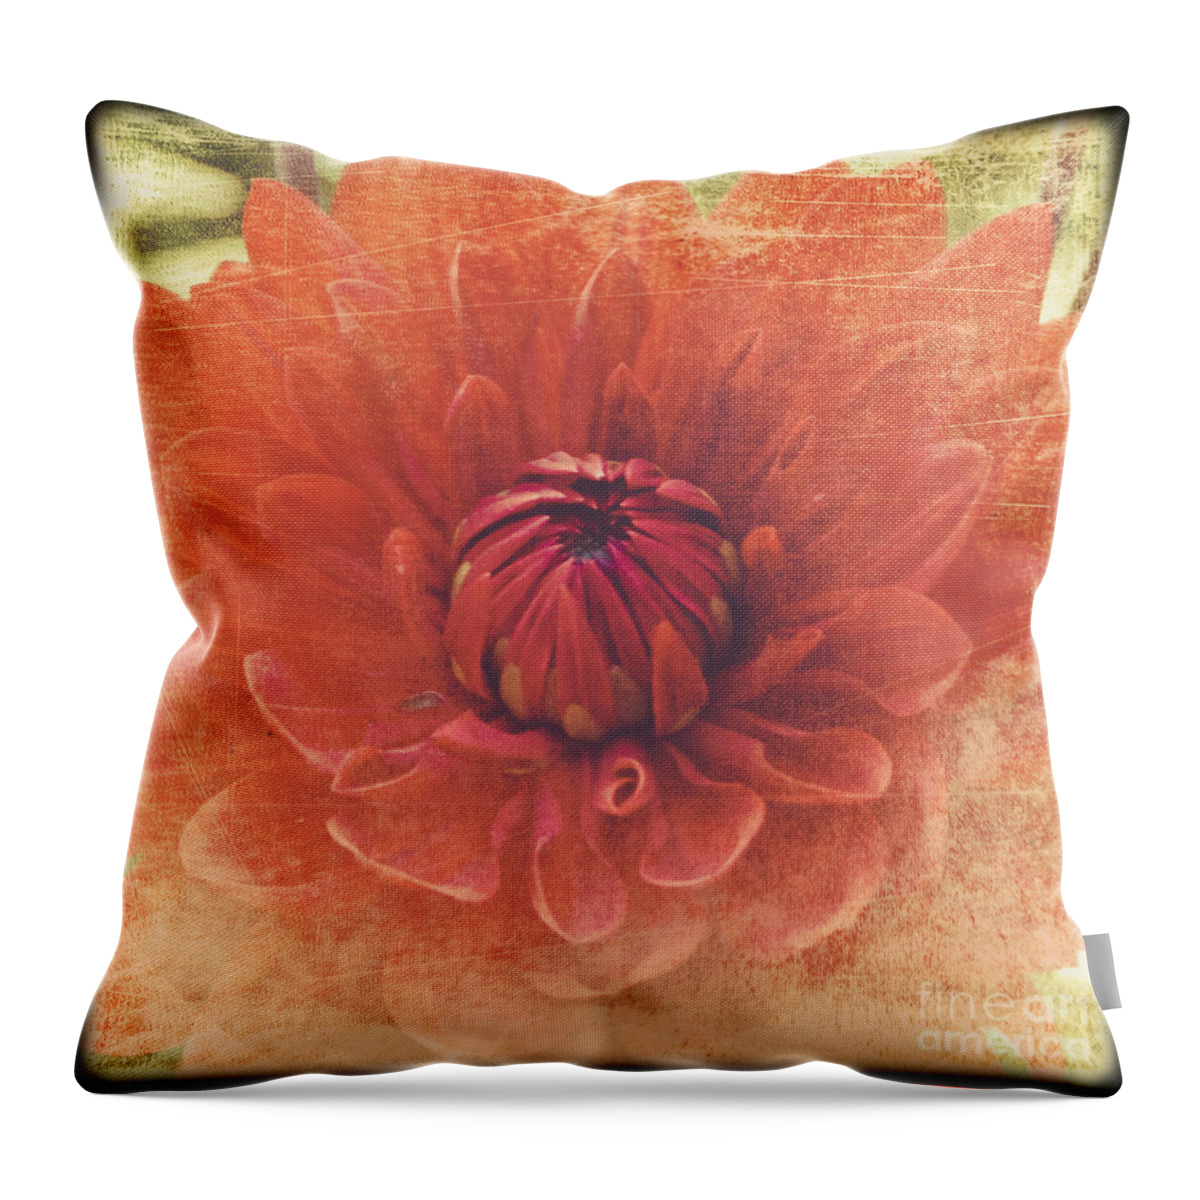 Flower Throw Pillow featuring the photograph Red Dahlia by Alana Ranney